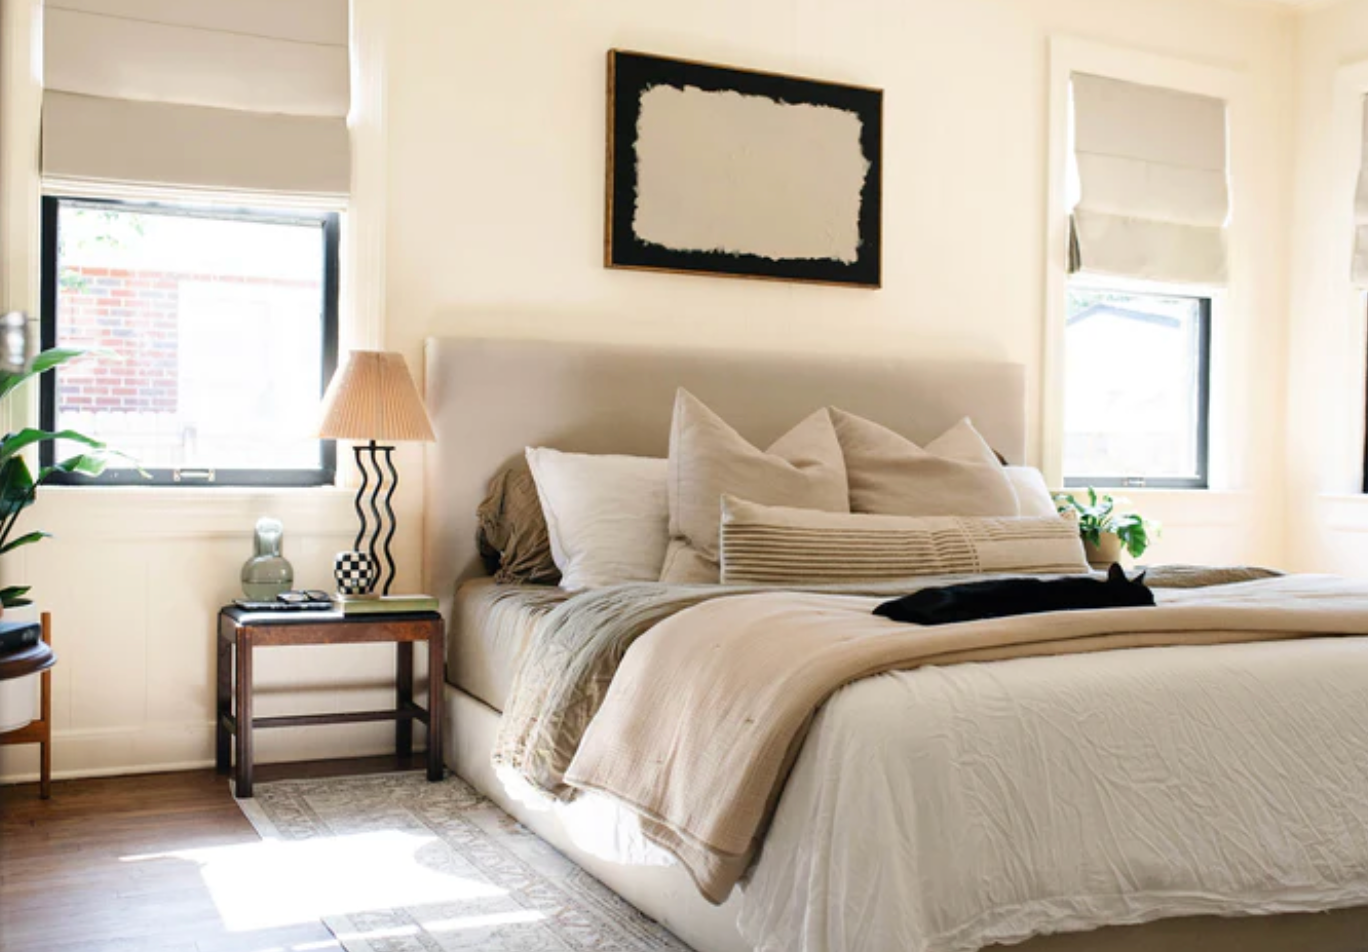 Lockford Home Styling - Bedroom Styling